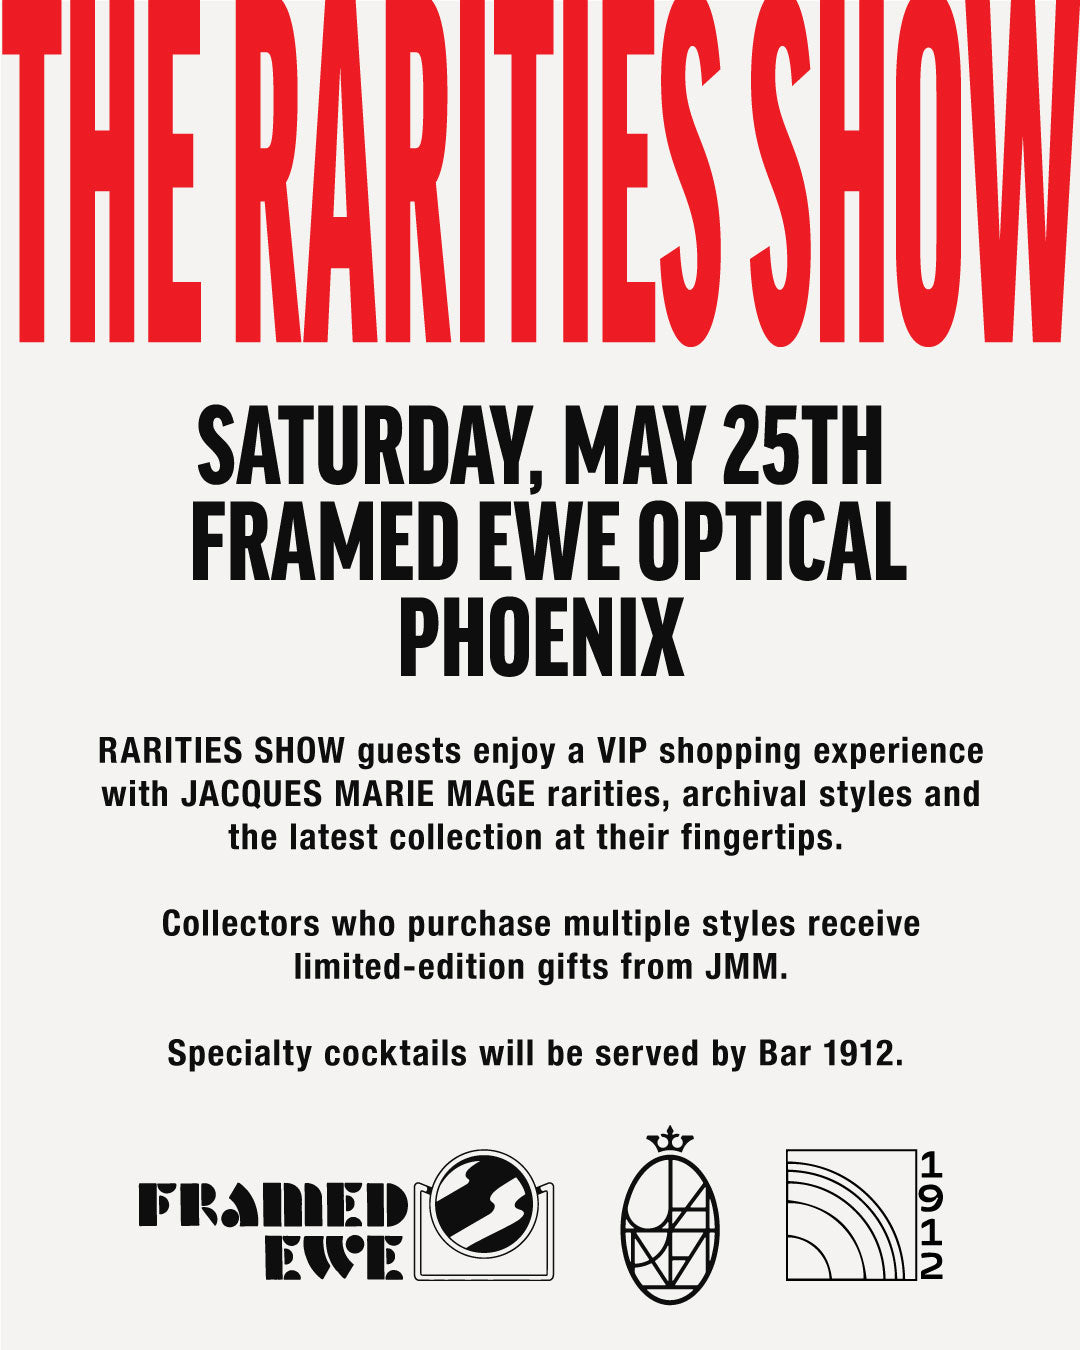 Jacques Marie Mage: THE RARITIES SHOW